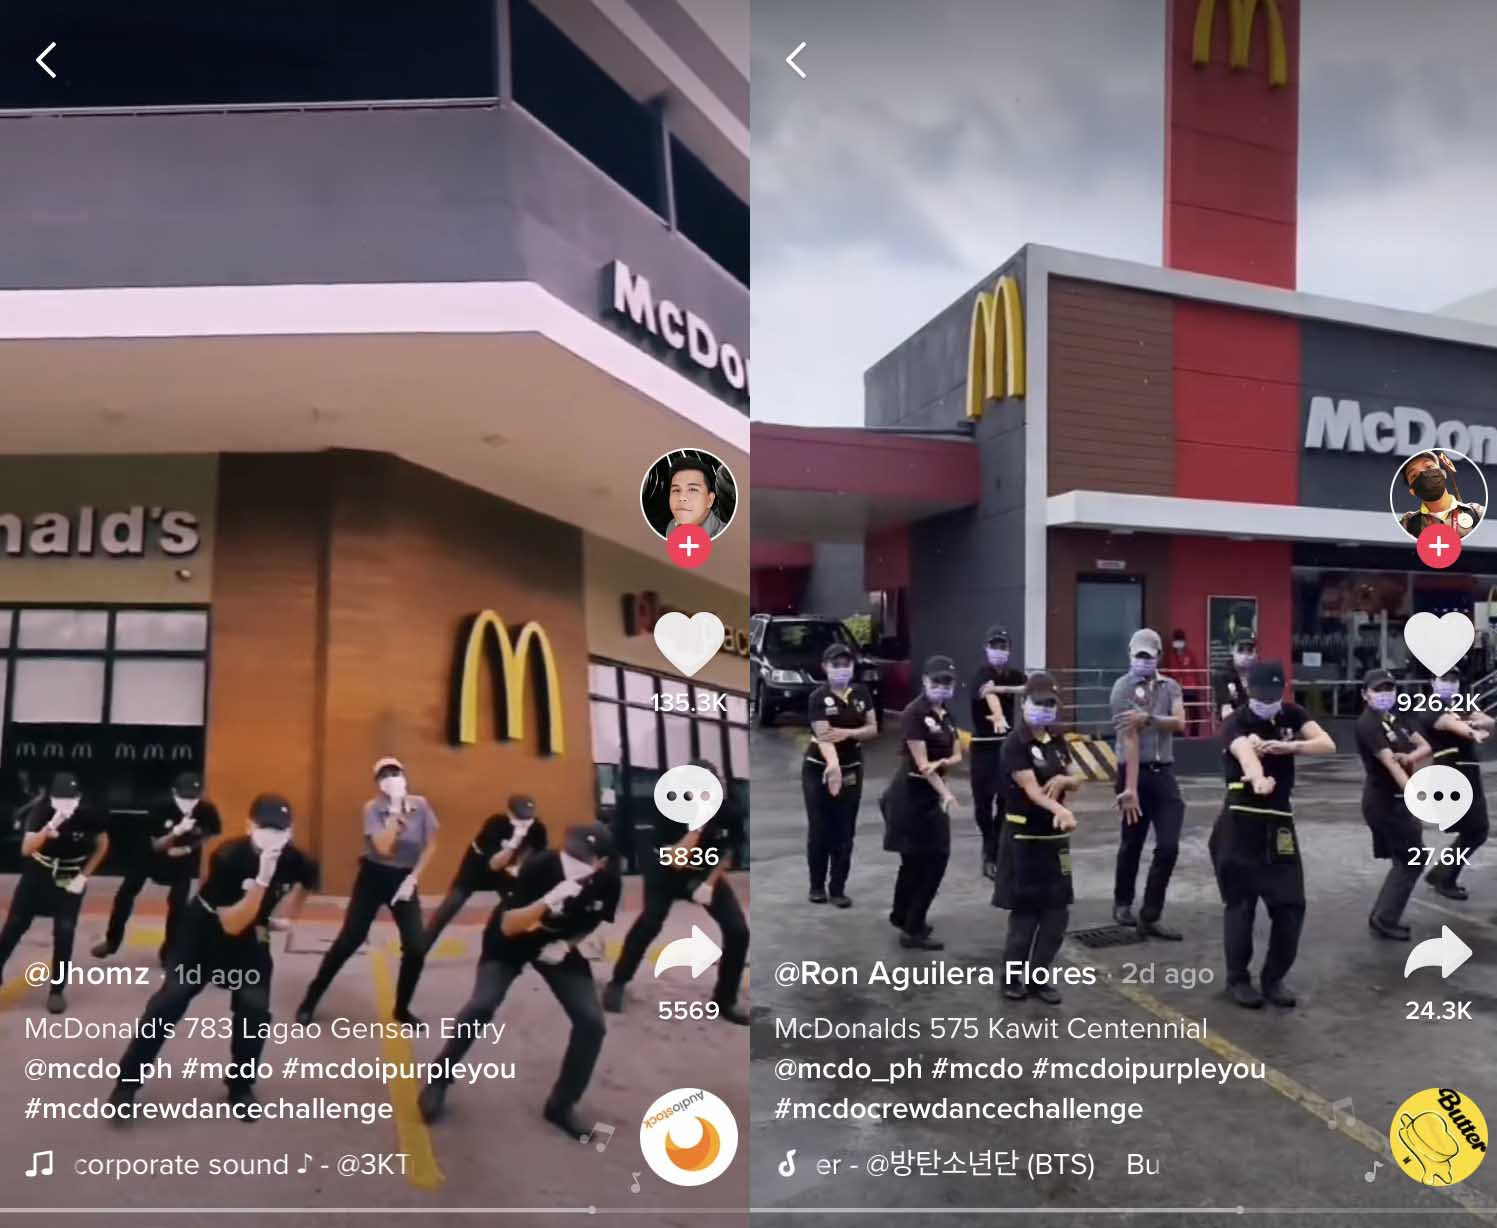 McDonald’s Philippines launches #McDoCrewDanceChallenge to show off their dance moves that are smooth like butter!